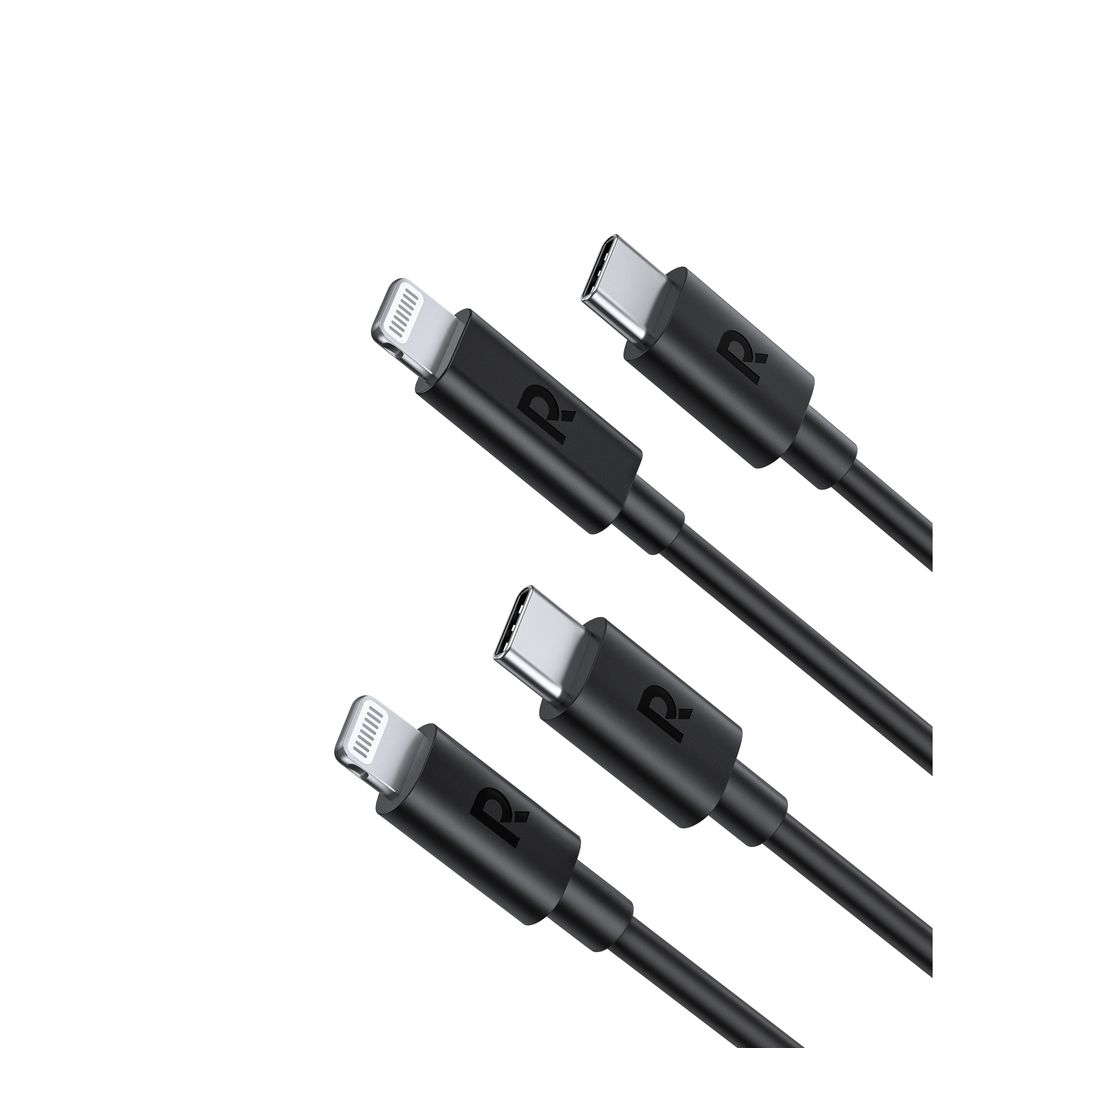 Ravpower 2-in-1 Cable Combo - Black